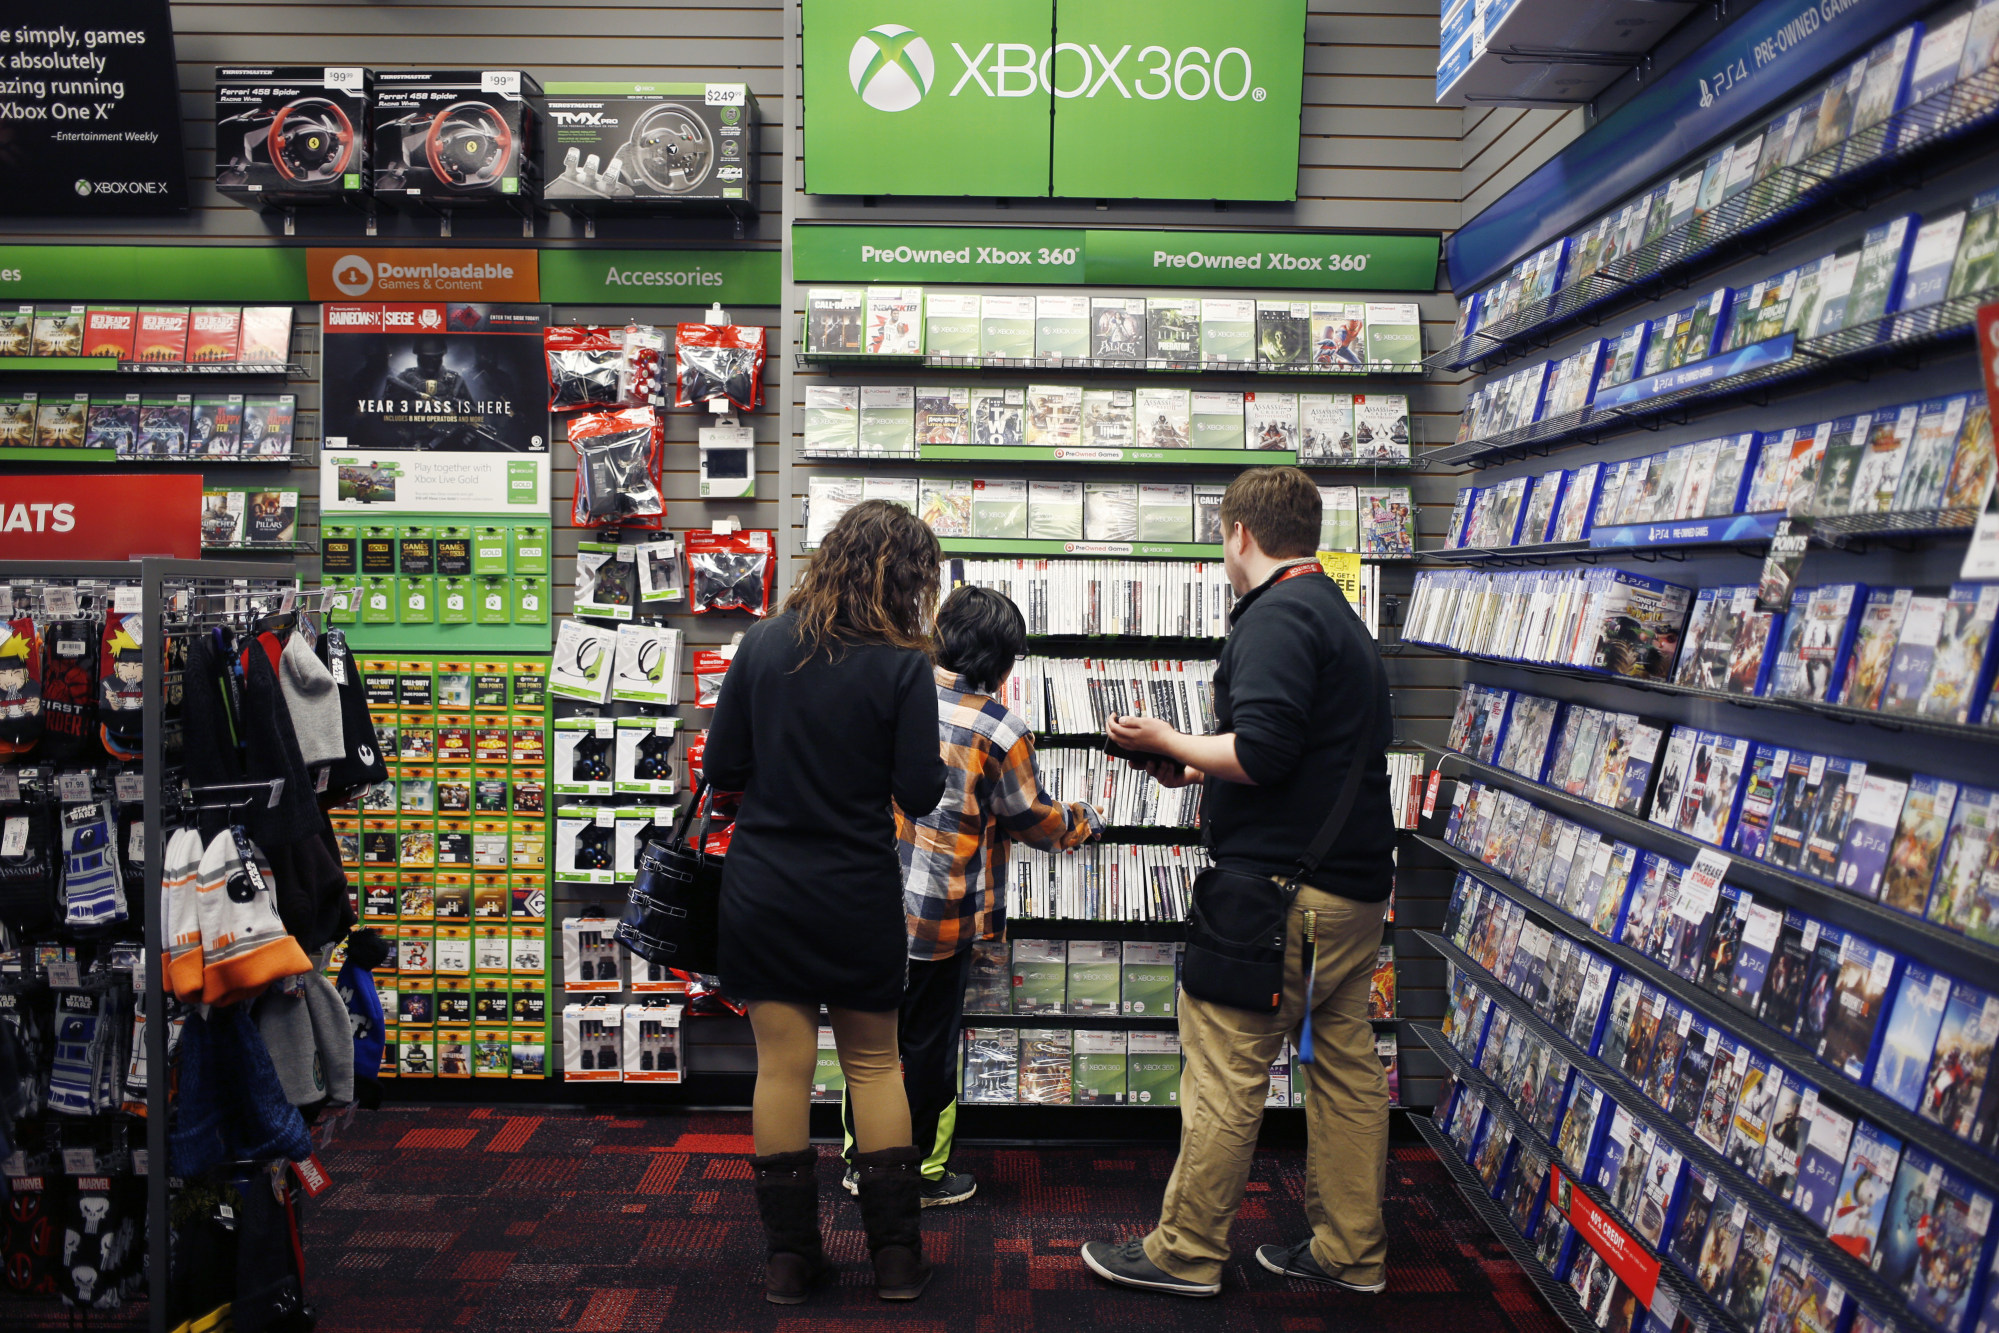 How GameStop, the World's Biggest Video Game Retailer, Started to Fail